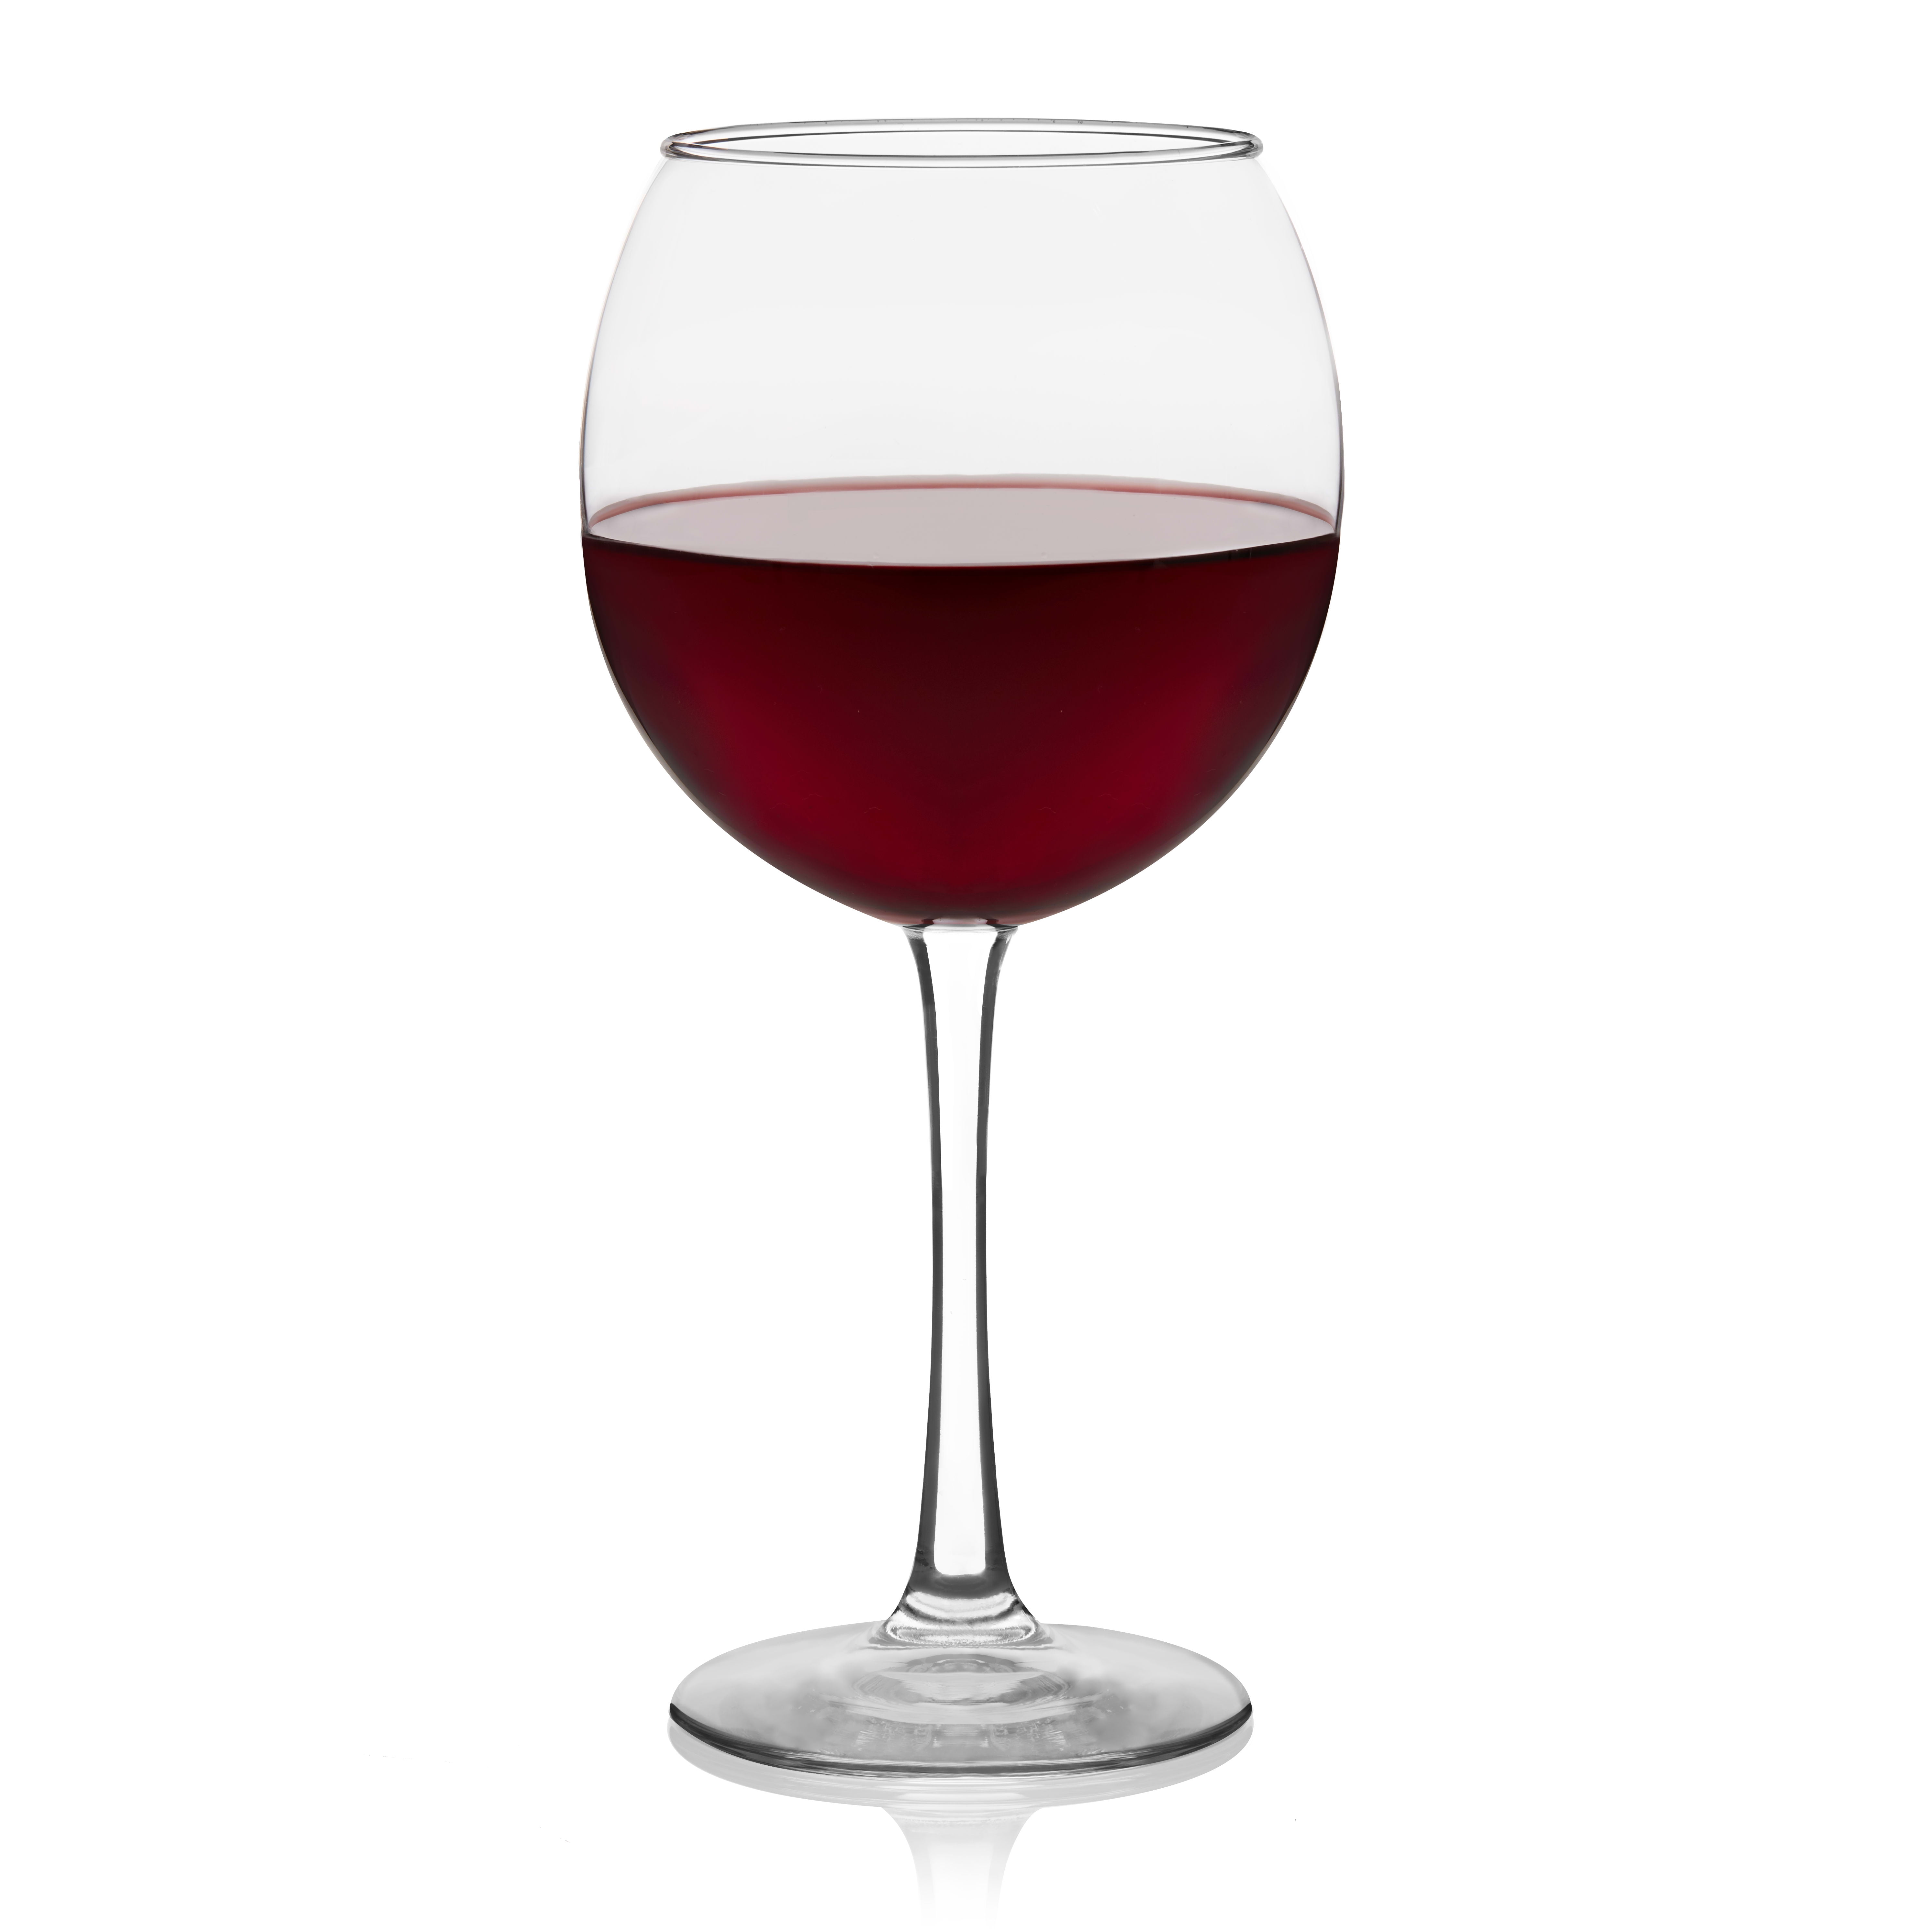 Libbey 4728001 Red Wine Glass, 18-1/2 oz., with Stem, D (Case of 12)